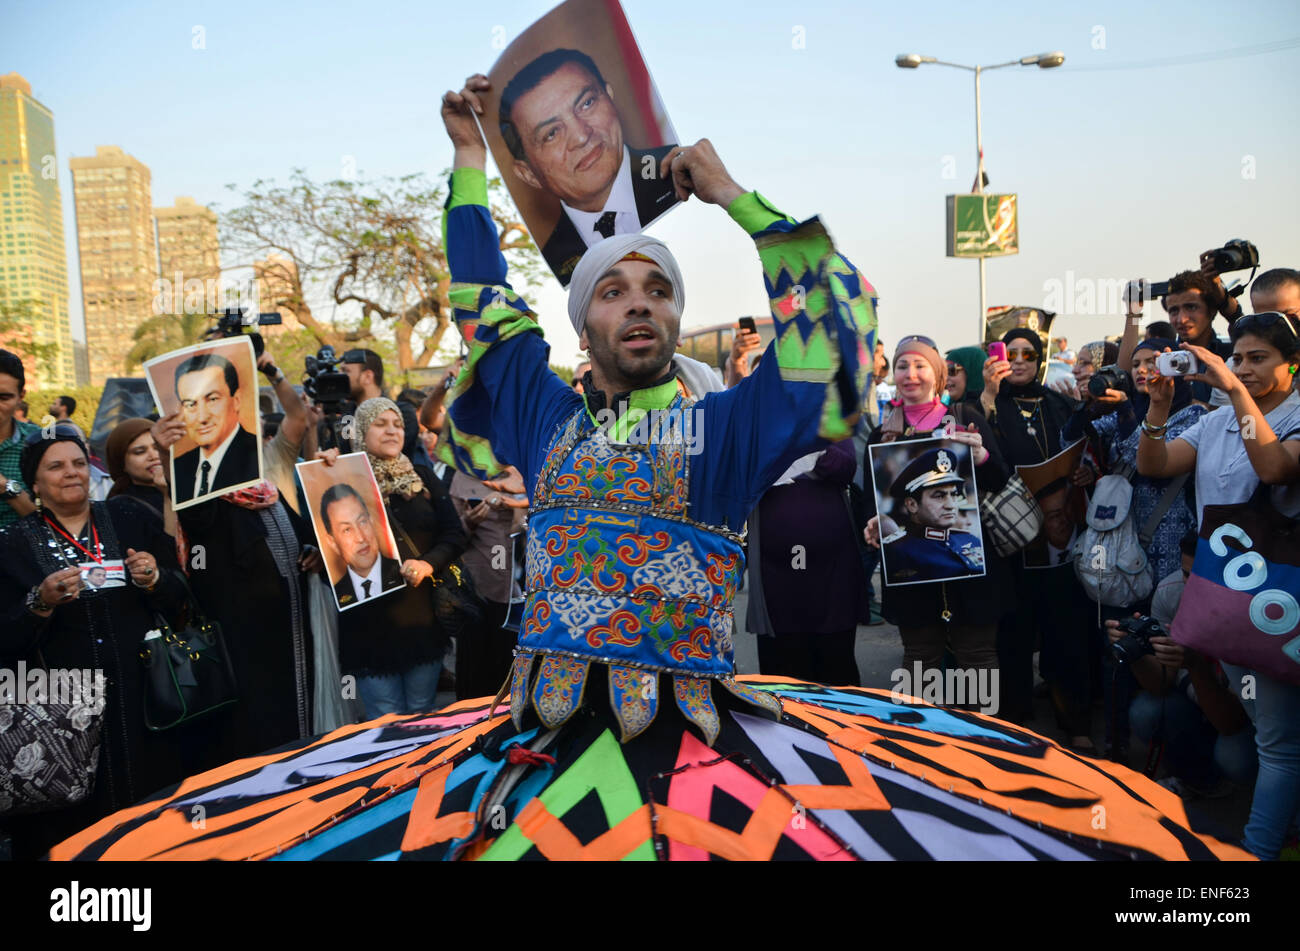 Cairo, Egypt. 5th May, 2015. A dancer performs as supporters of former President Hosni Mubarak holds his picture during a celebration to mark his 87th birthday, outside Maadi military hospital, near Cairo on May 4, 2015. An Egyptian legal authority on Monday ruled in favor of former President Hosni Mubarak by allowing him to retain his 'privileges' as former president, a judicial source has said © Amr Sayed/APA Images/ZUMA Wire/Alamy Live News Stock Photo